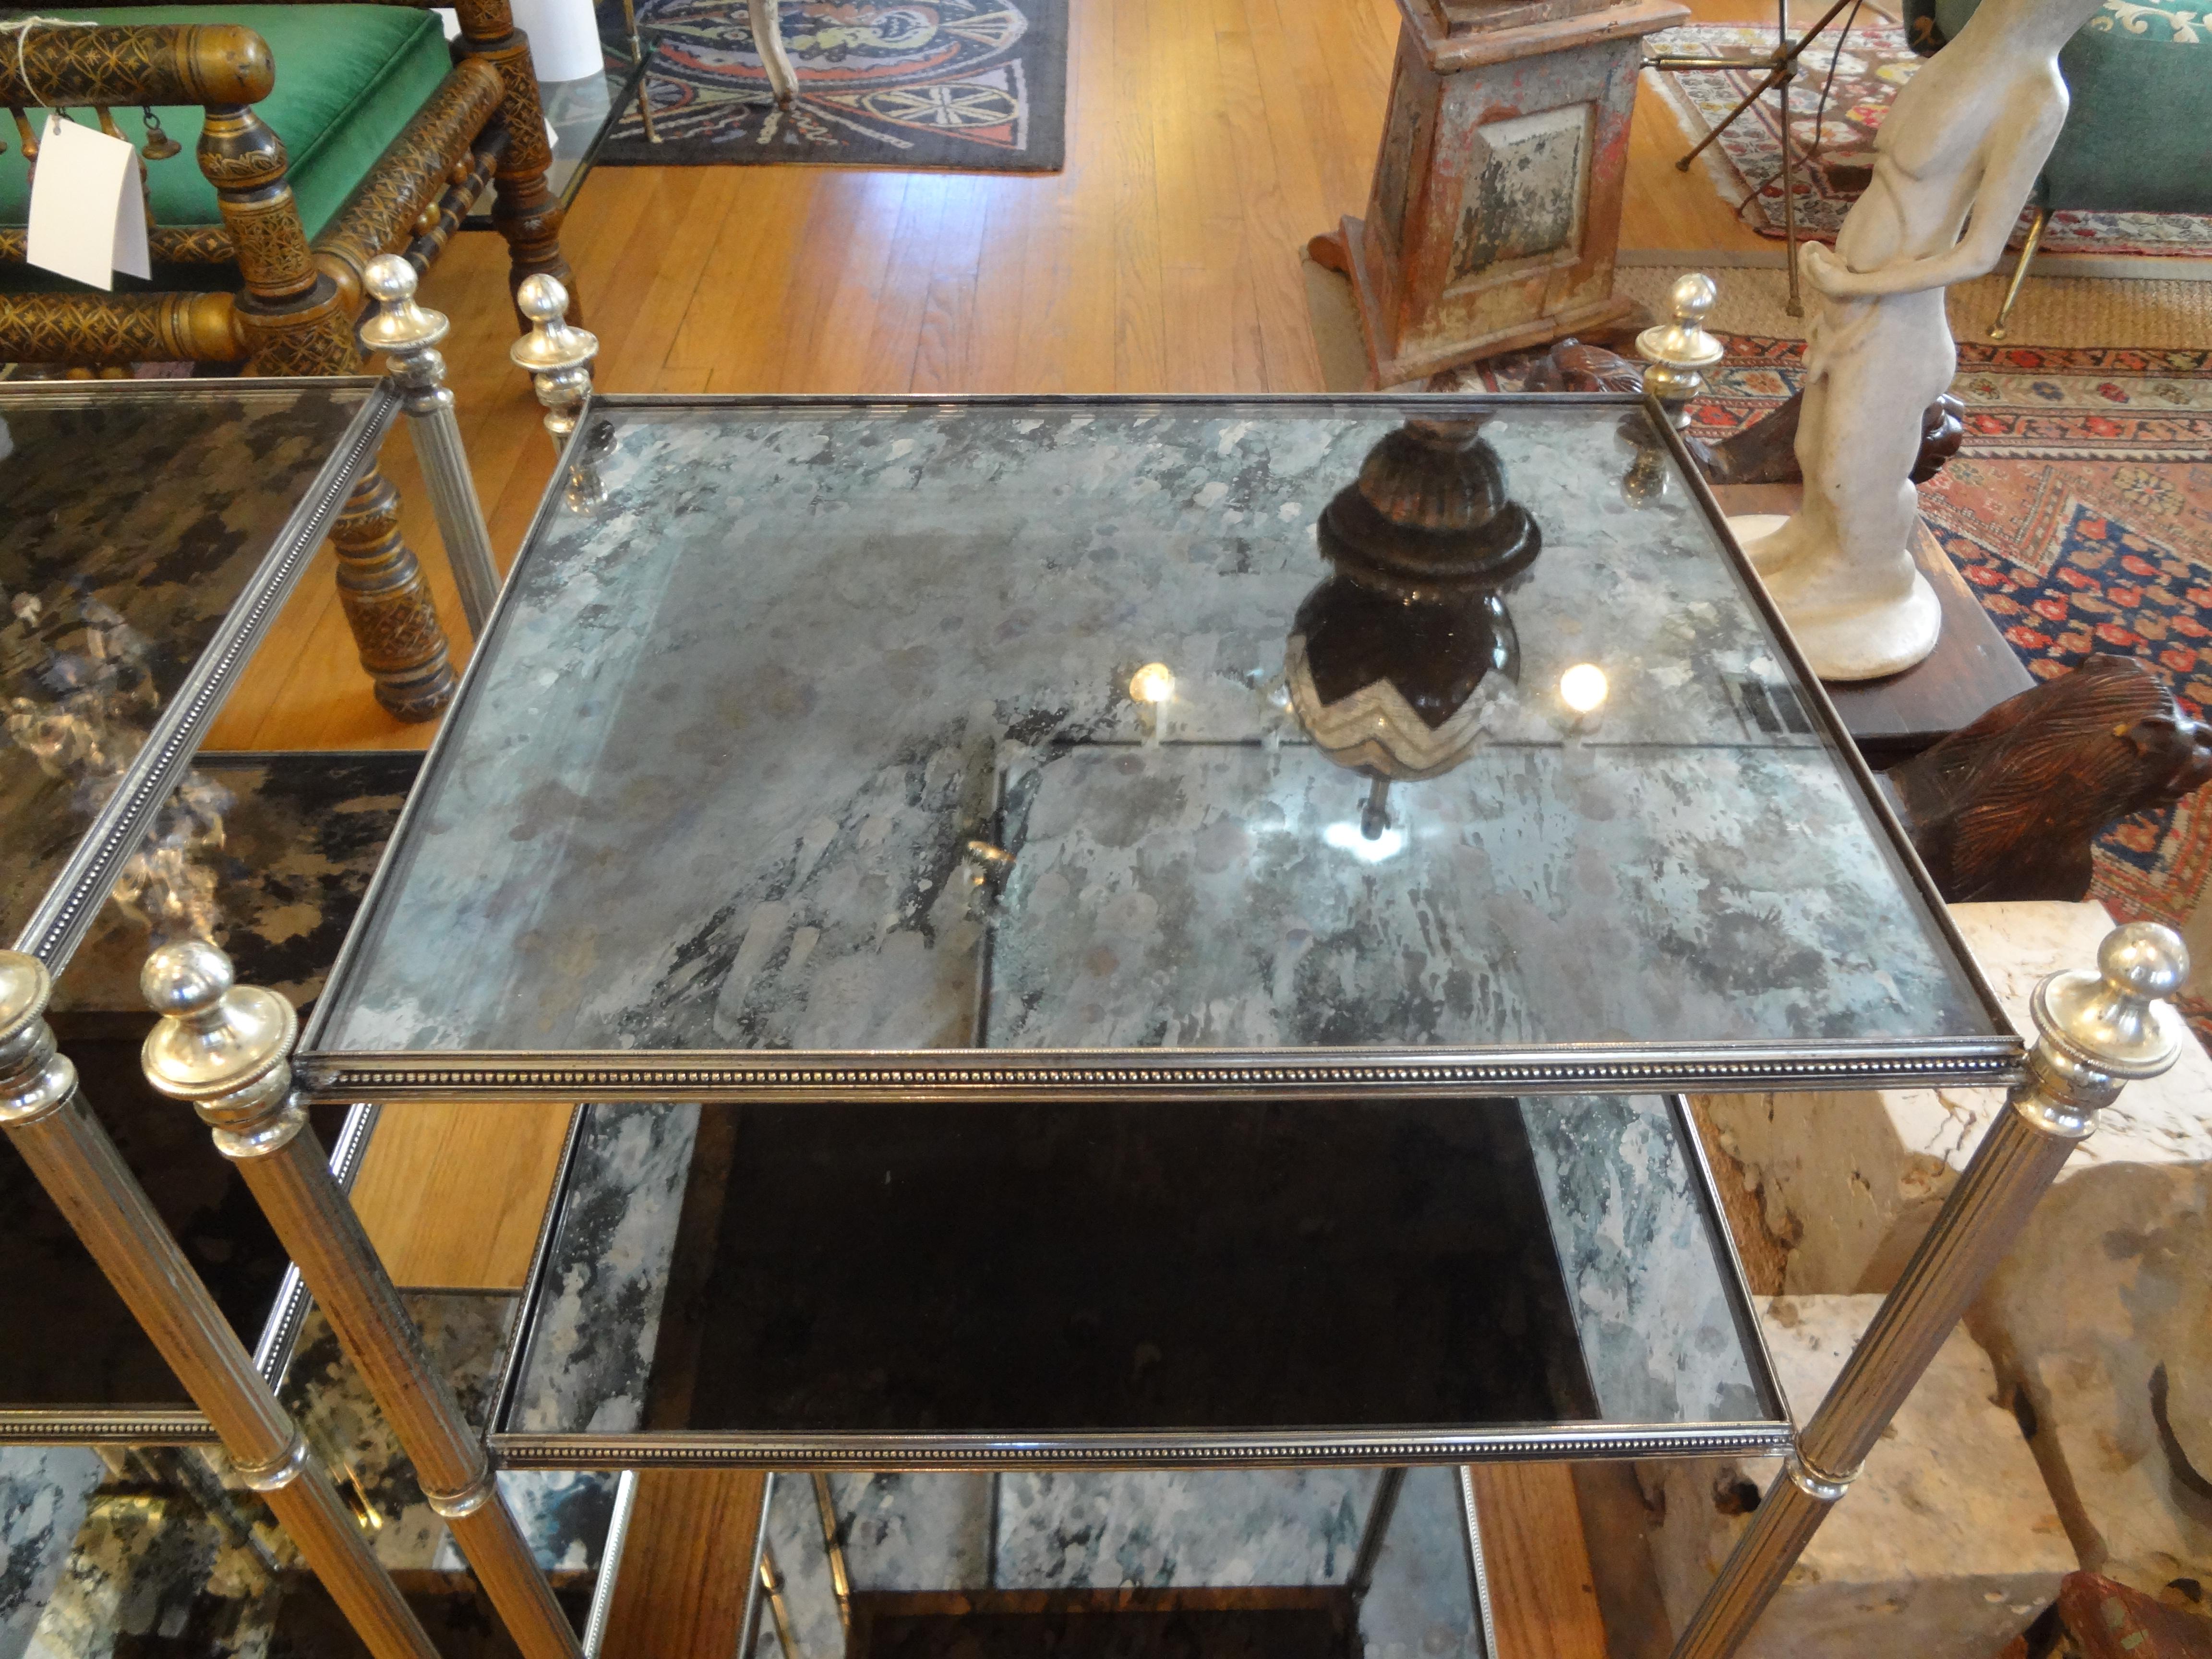 Stunning pair of vintage French Maison Jansen or Maison Baguès style silver plated three-tiered tables, side tables, end tables, drink tables or cigarette tables. This hard to find pair of French neoclassical style or Louis XVI style silver tables